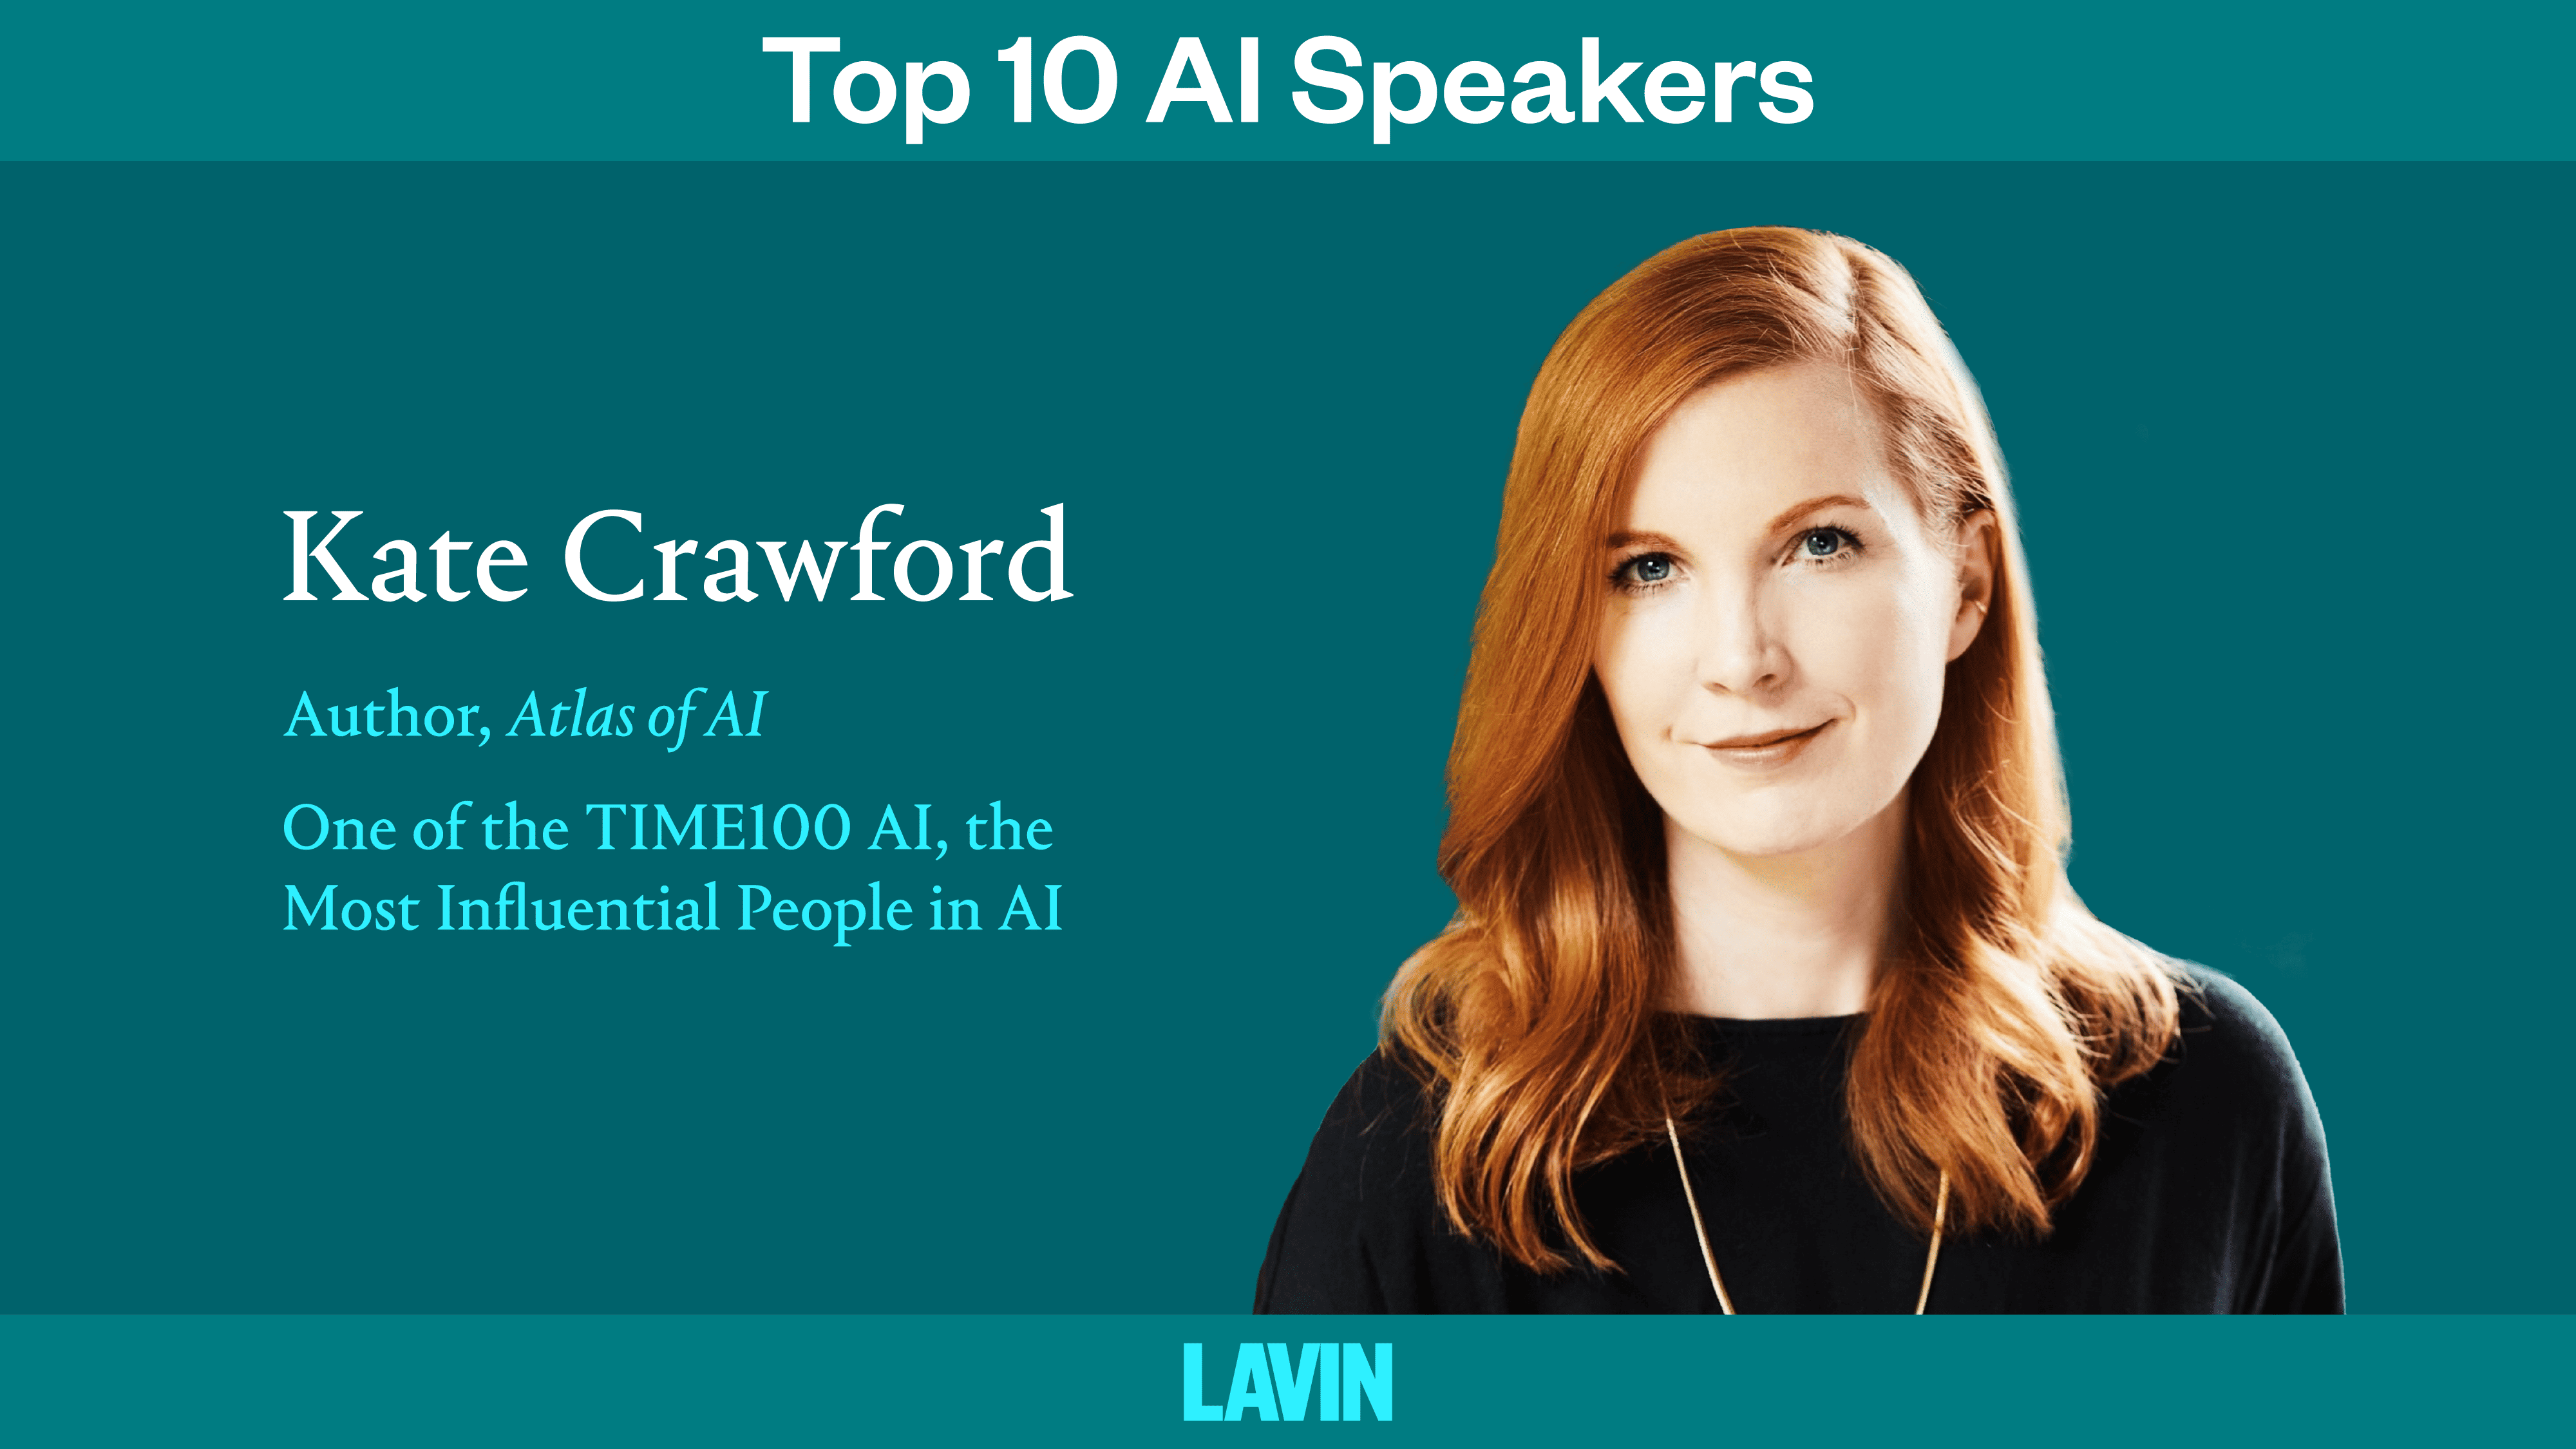 Top 10 AI Speaker Kate Crawford: Artificial Intelligence Is “Neither Artificial nor Intelligent”